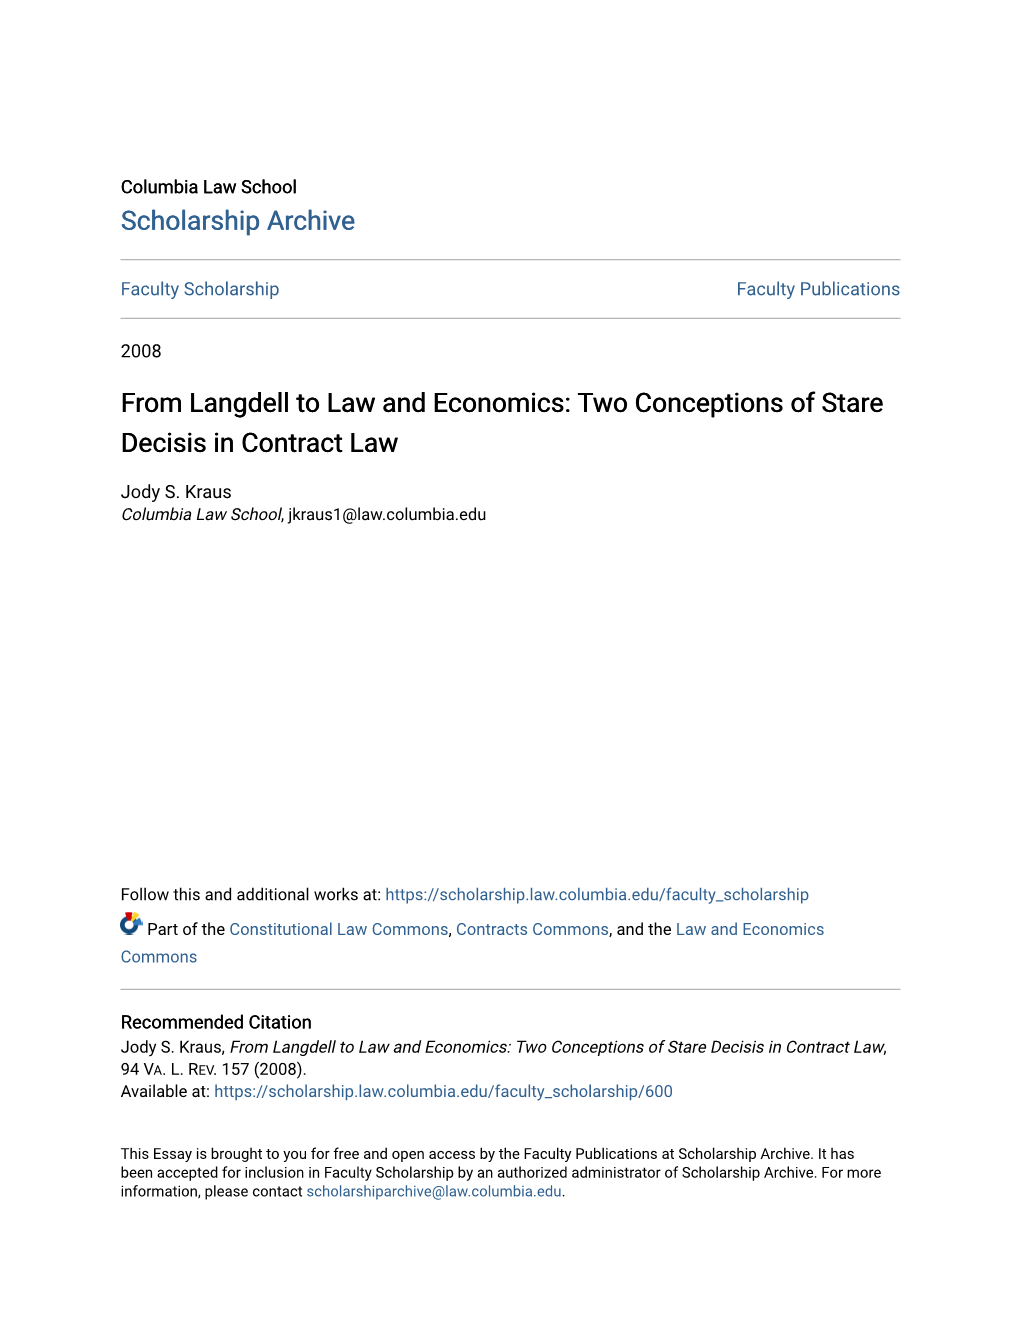 From Langdell to Law and Economics: Two Conceptions of Stare Decisis in Contract Law